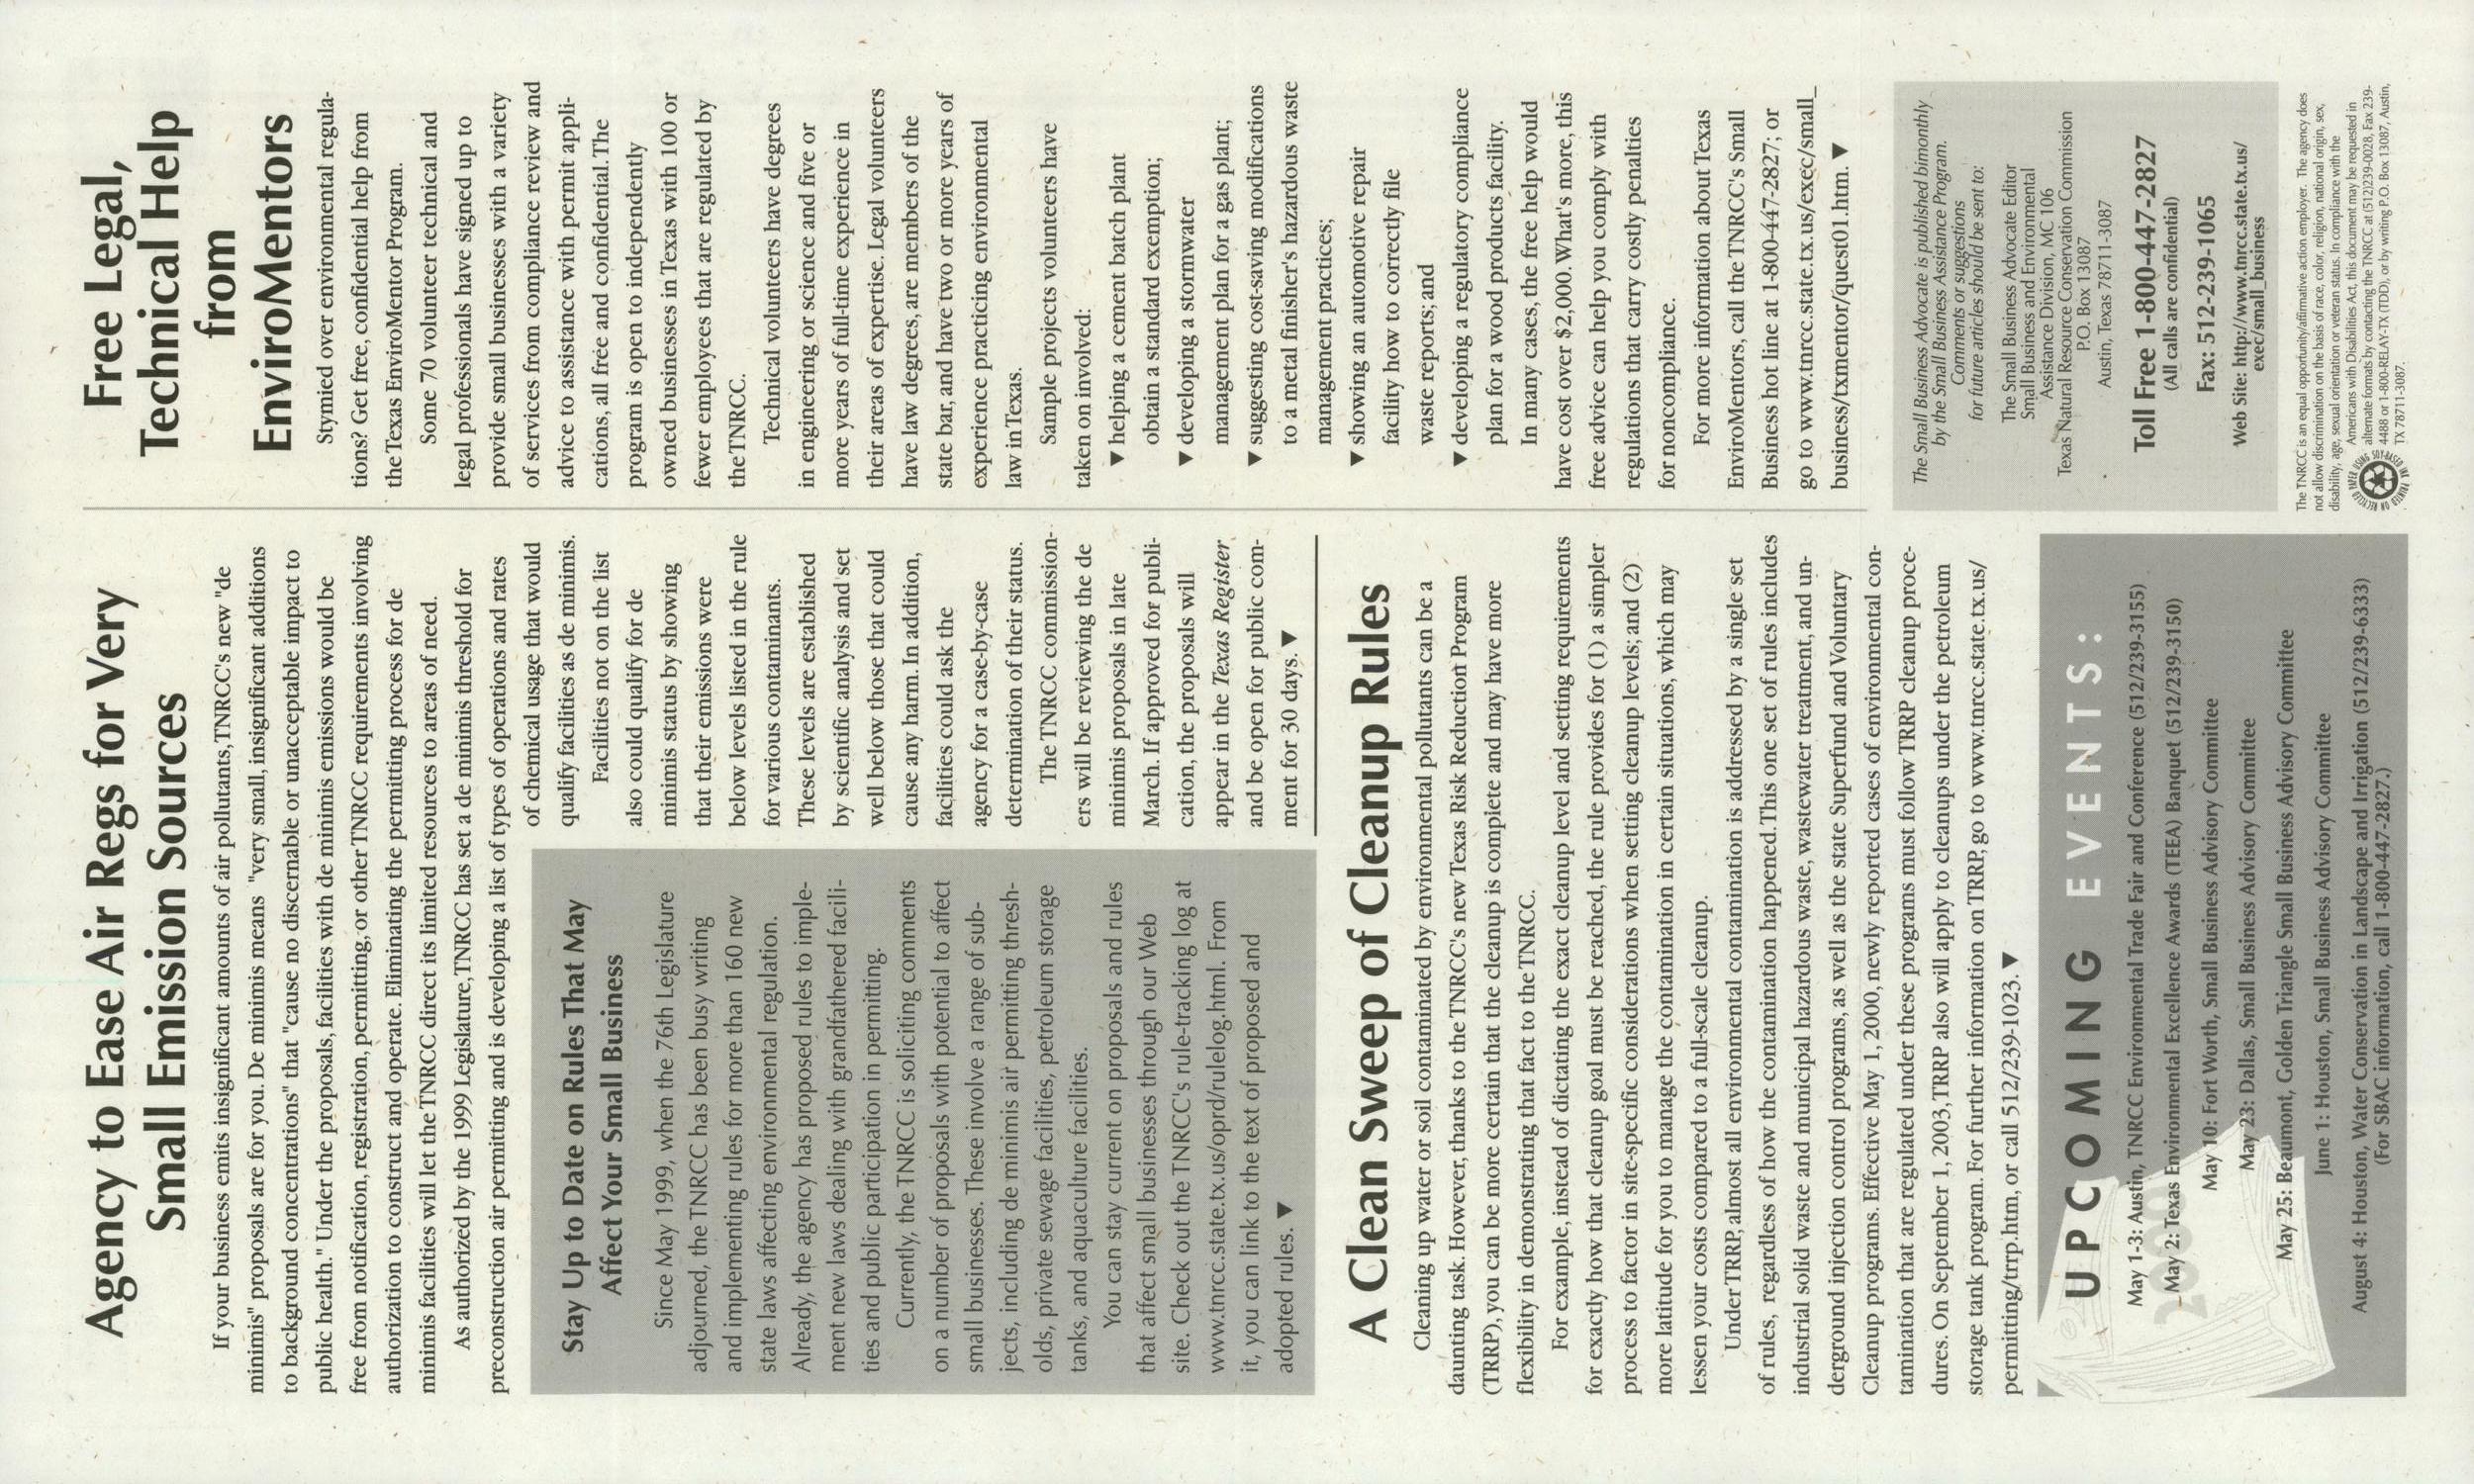 The Small Business Advocate, Volume 5, Issue 2, March-April 2000
                                                
                                                    BACK COVER
                                                